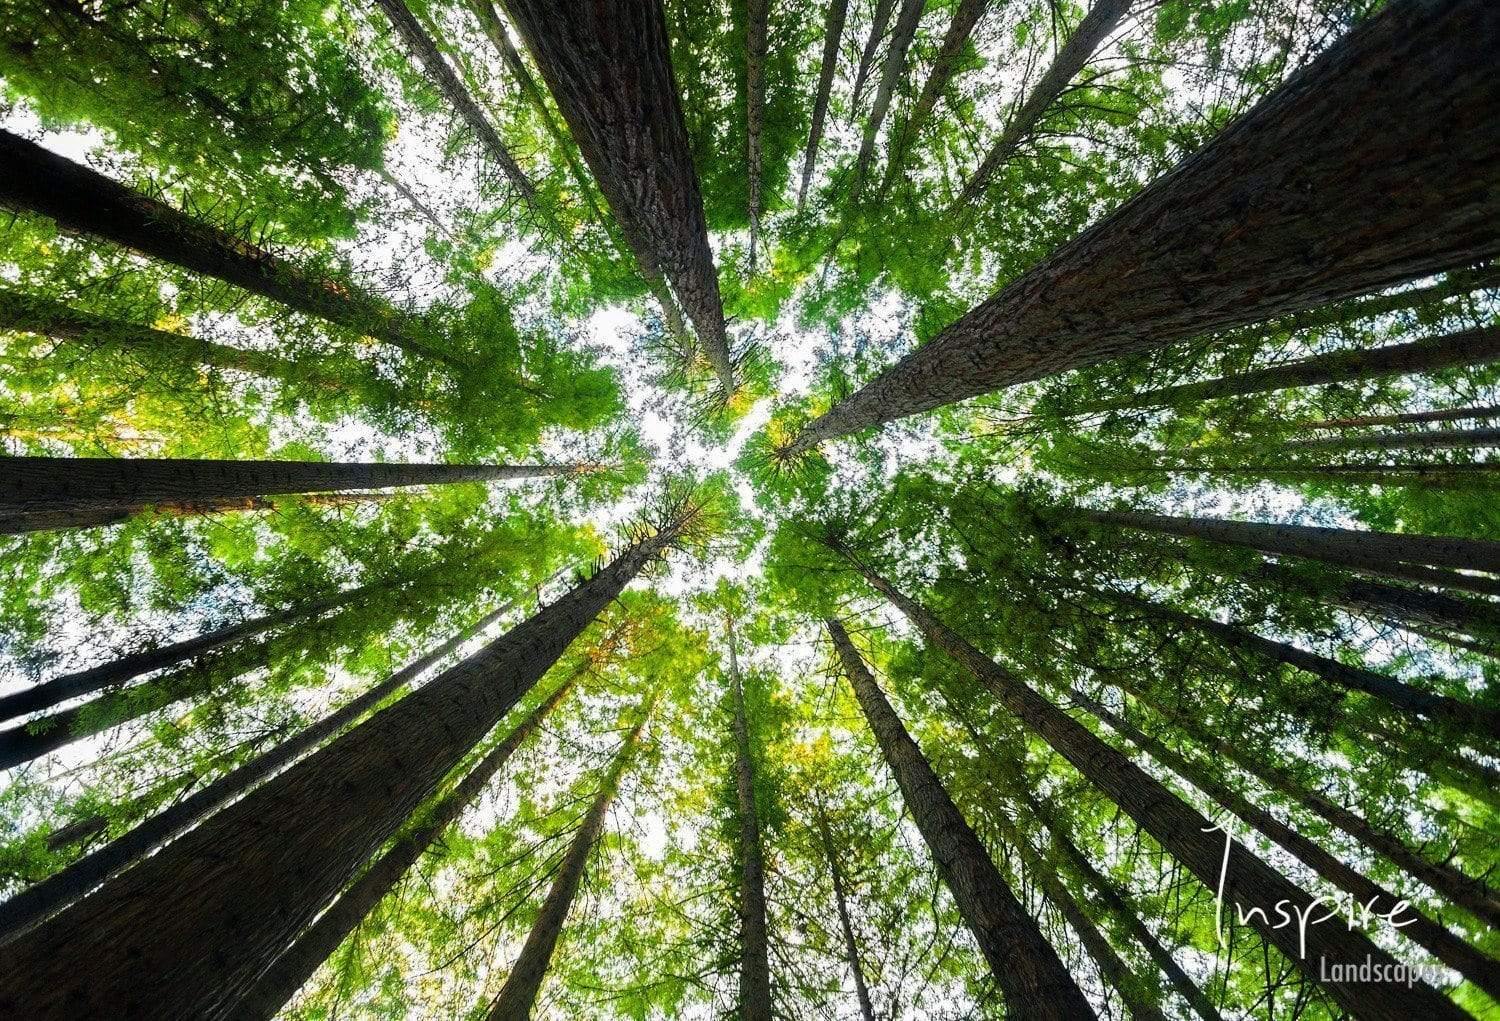 A picture was taken from bottom to top angle, beautiful group of some very tall trees standing tall with their top meeting at the height, Californian Redwoods - Great Ocean Road VIC